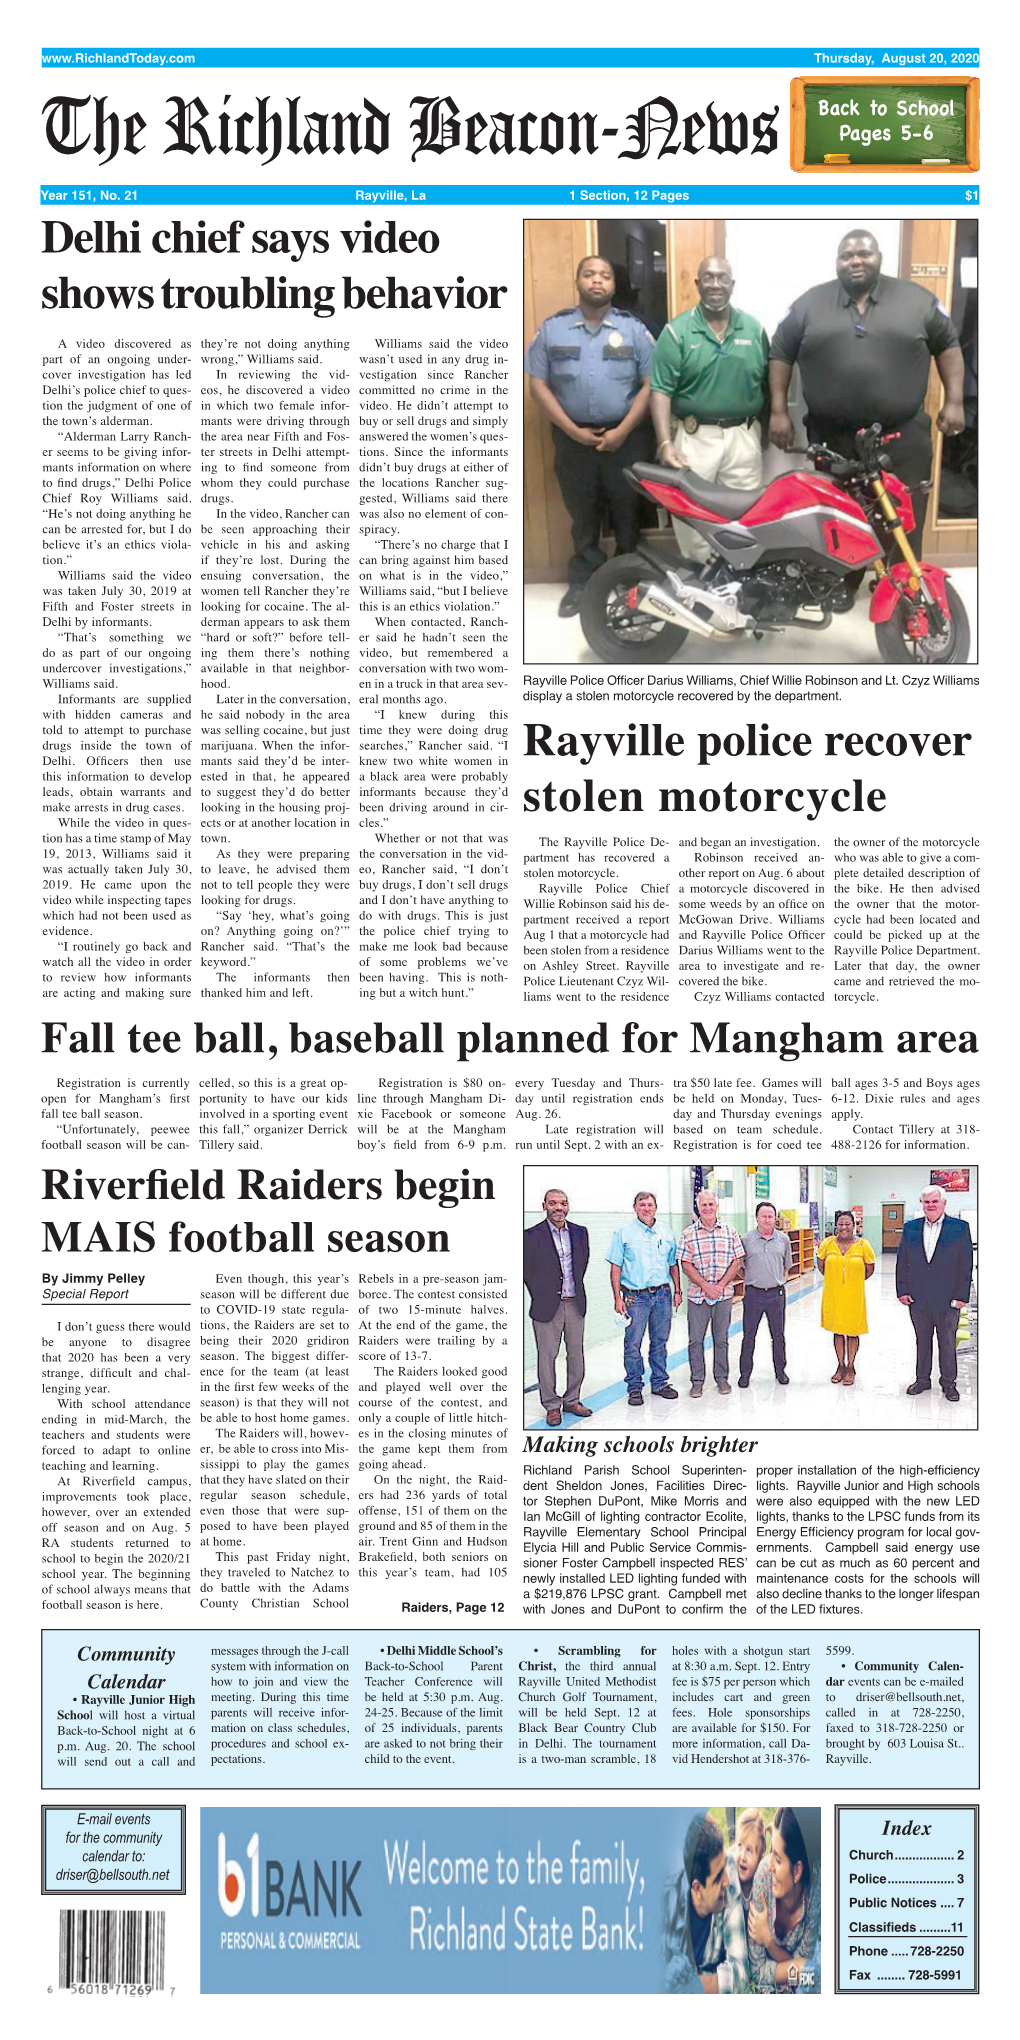 The Richland Beacon-News Pages 5-6